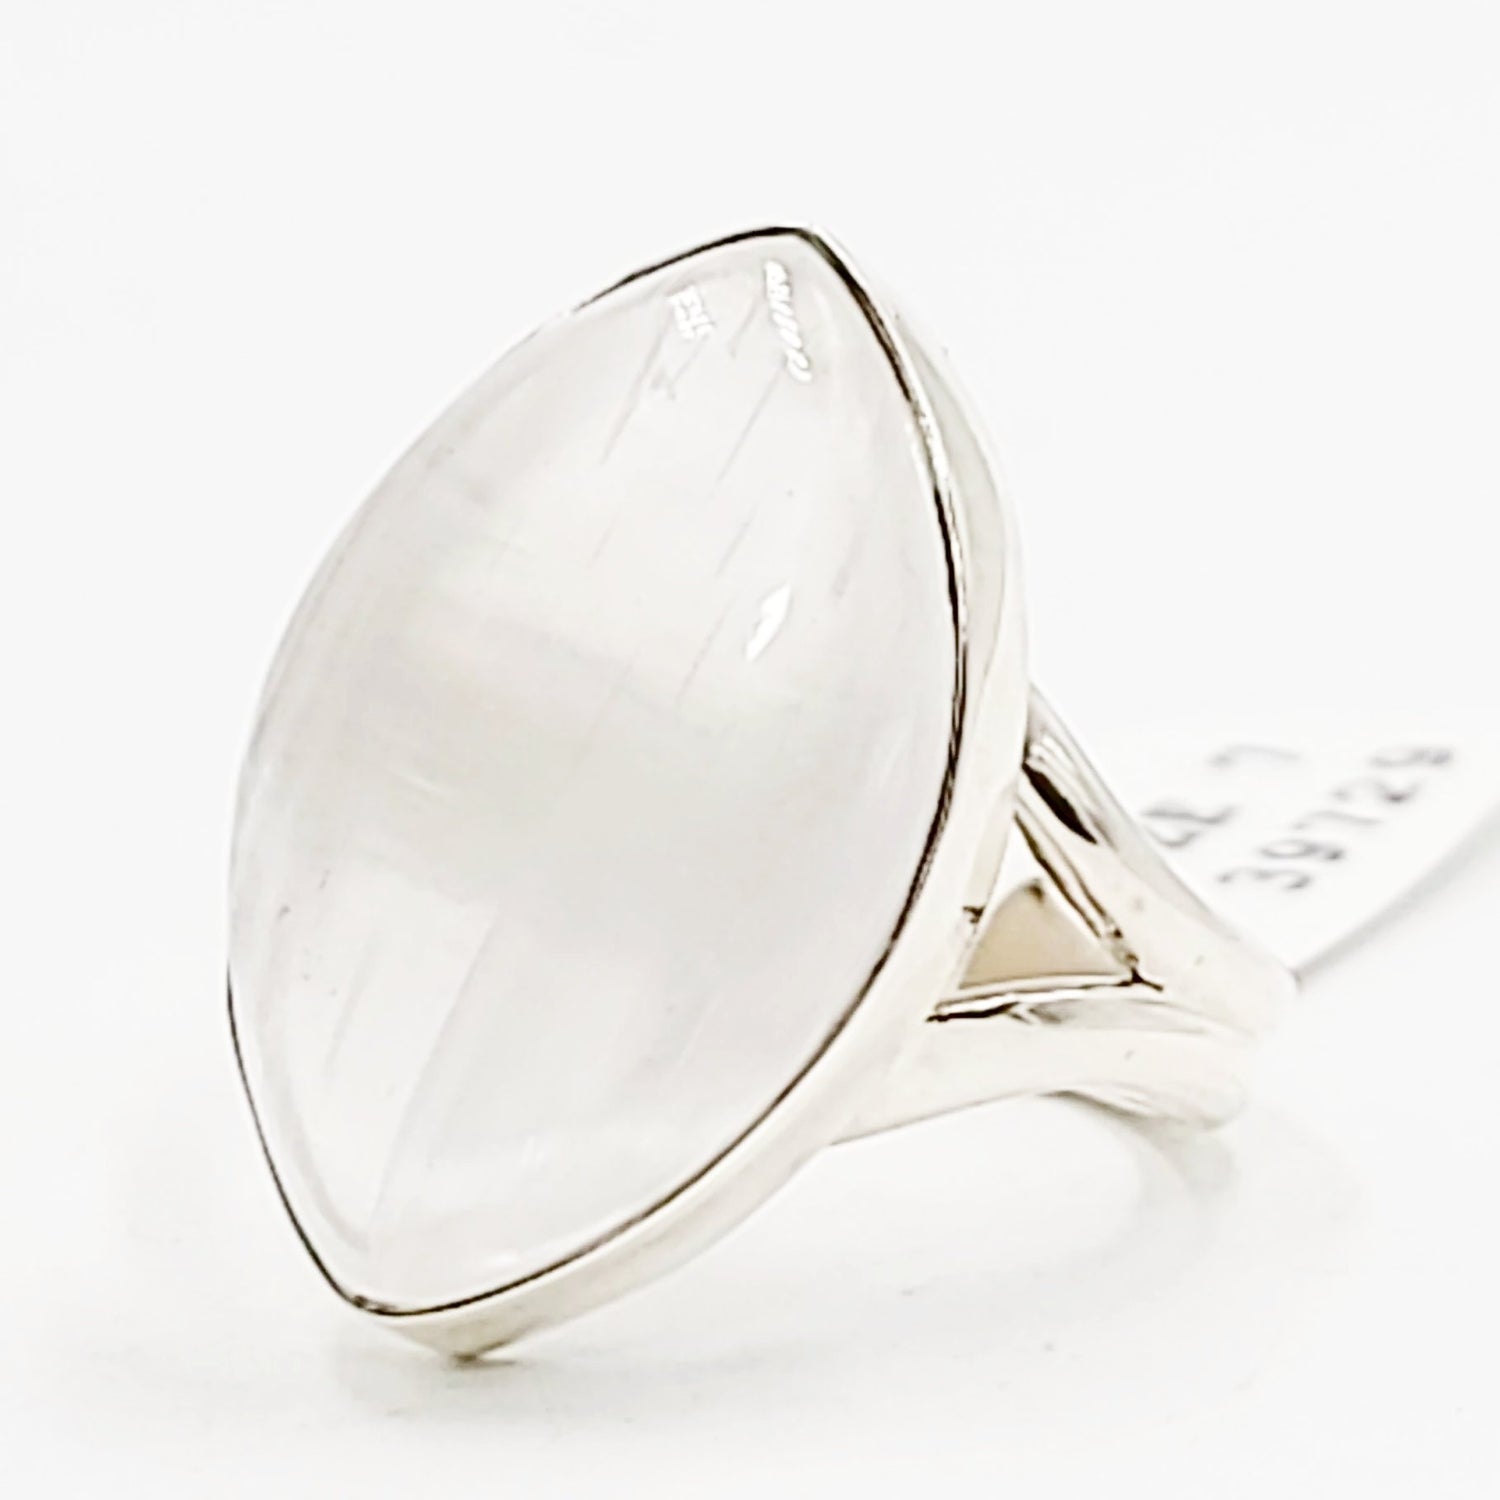 Selenite Eye Ring Sterling Silver Size 7 - Elevated Metaphysical